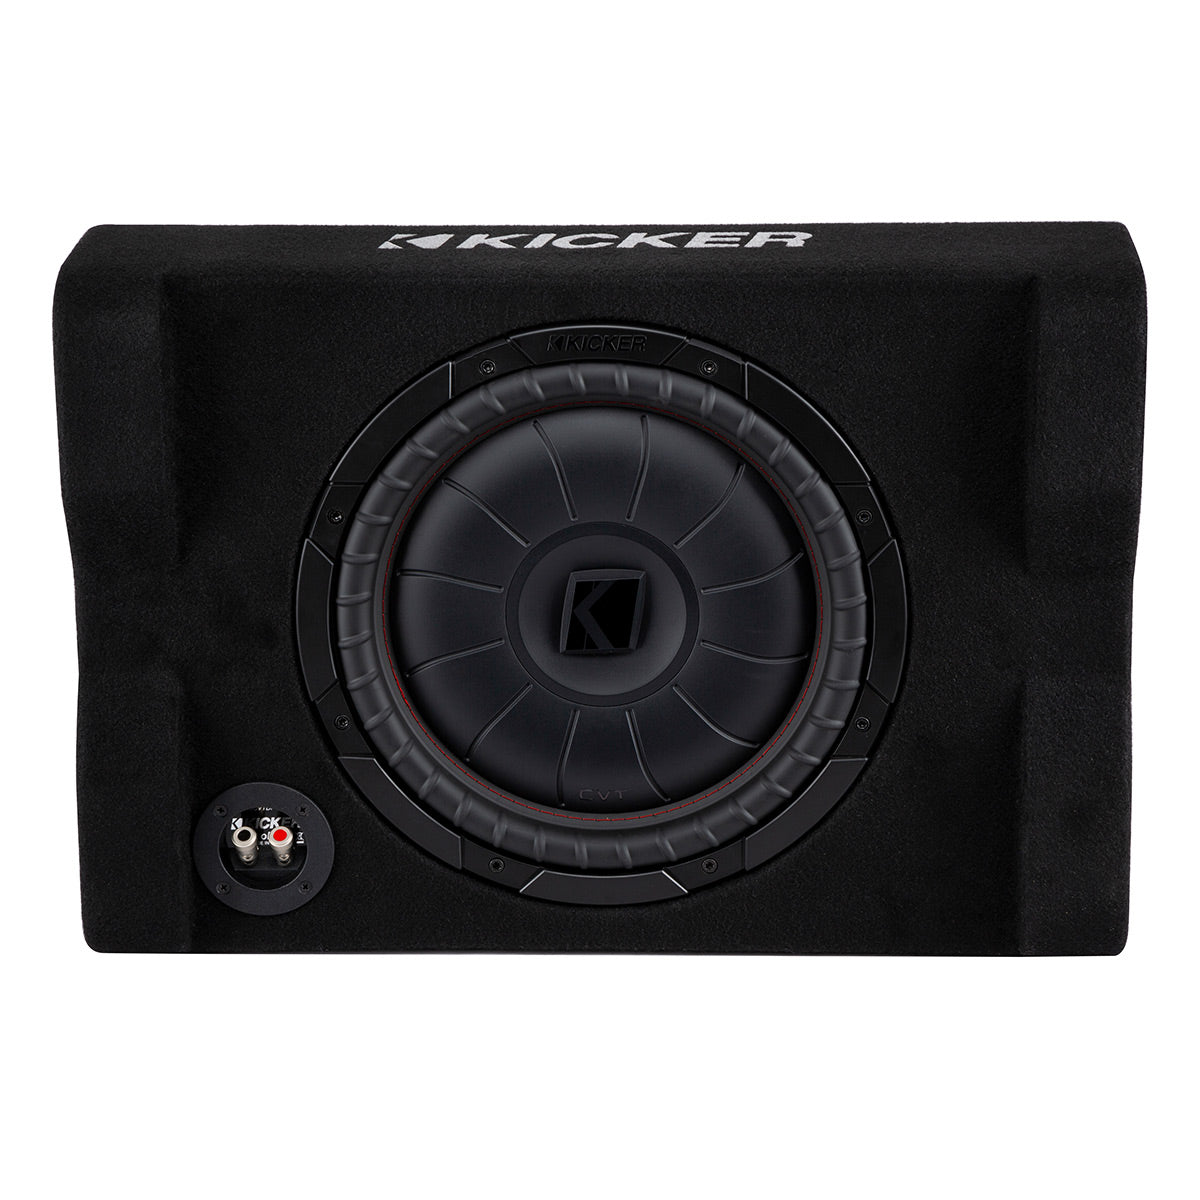 Kicker 48CVTDF122 Sealed Down-Firing Enclosure with 12" 2-Ohm Subwoofer